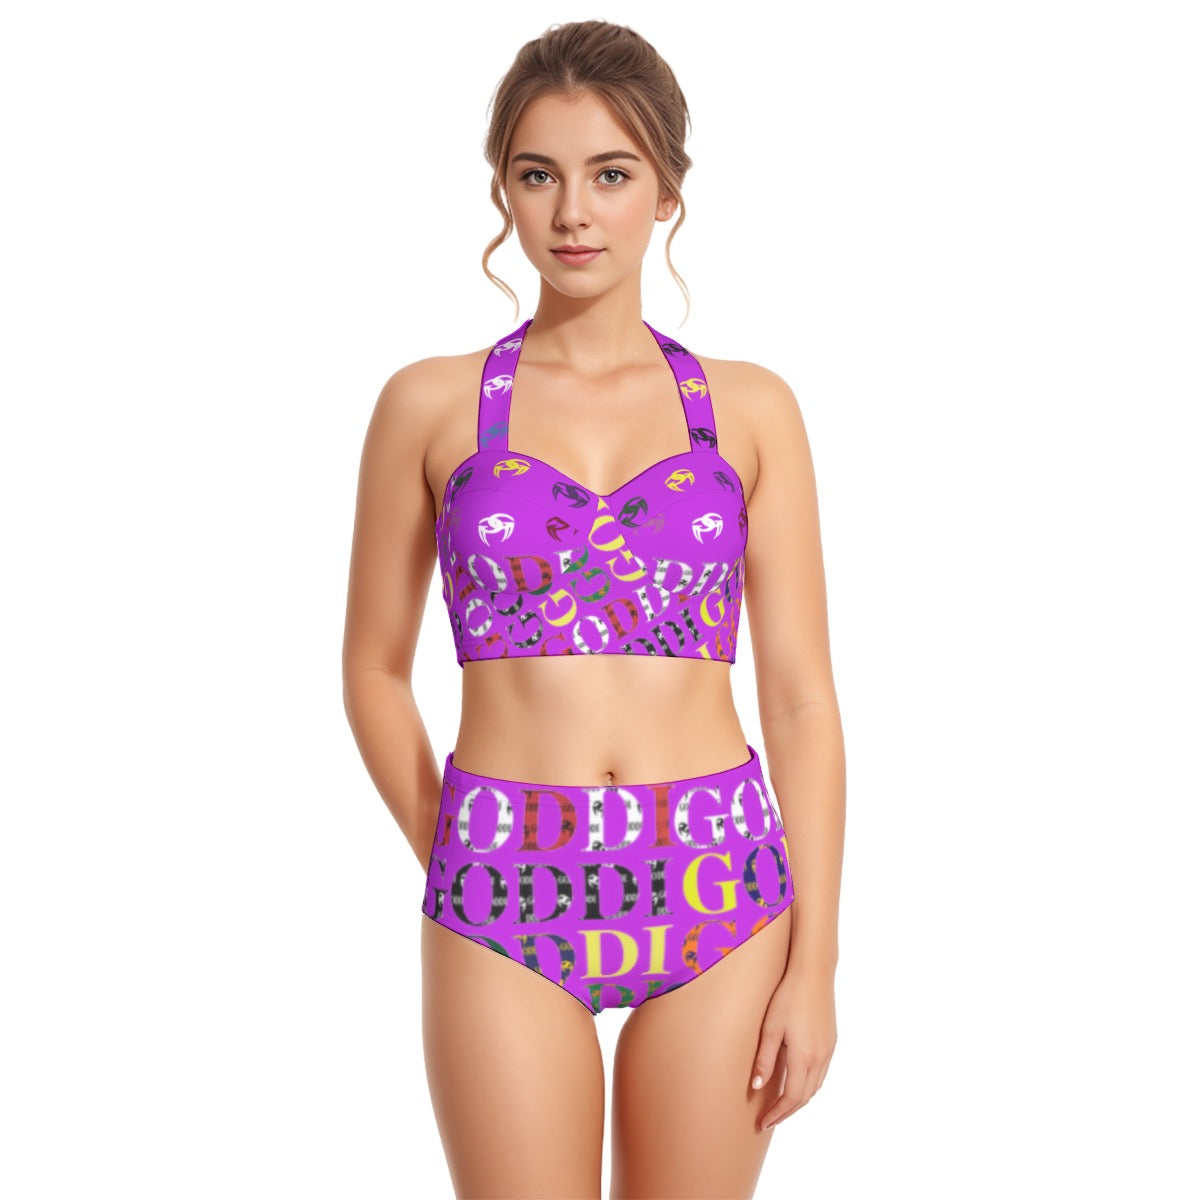 All-Over Print Women's Swimsuit Set With Halter